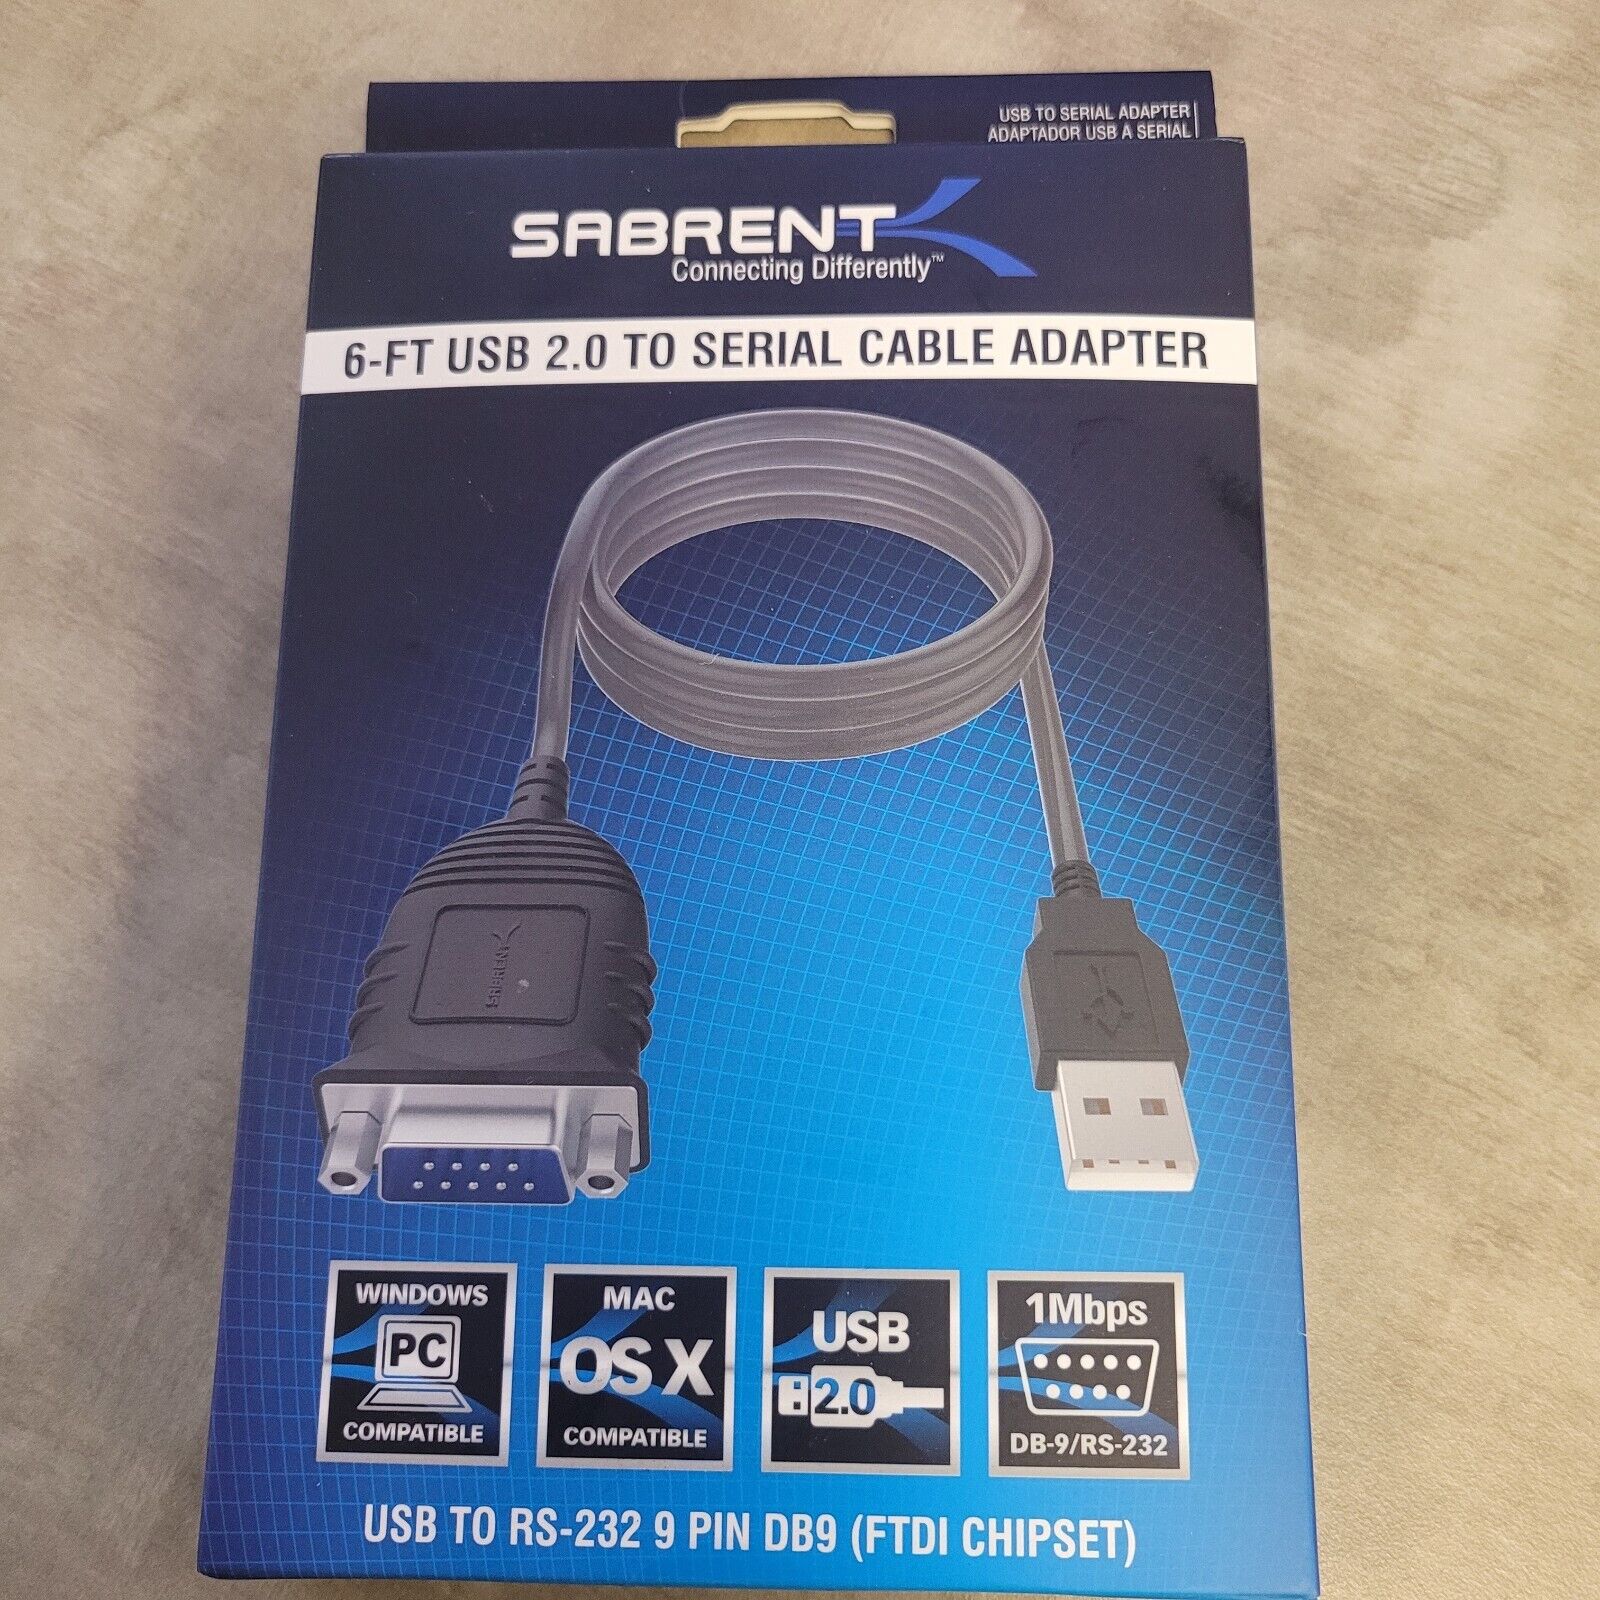 NEW BLACK SABRENT USB 2.0 TO SERIAL CABLE ADAPTER